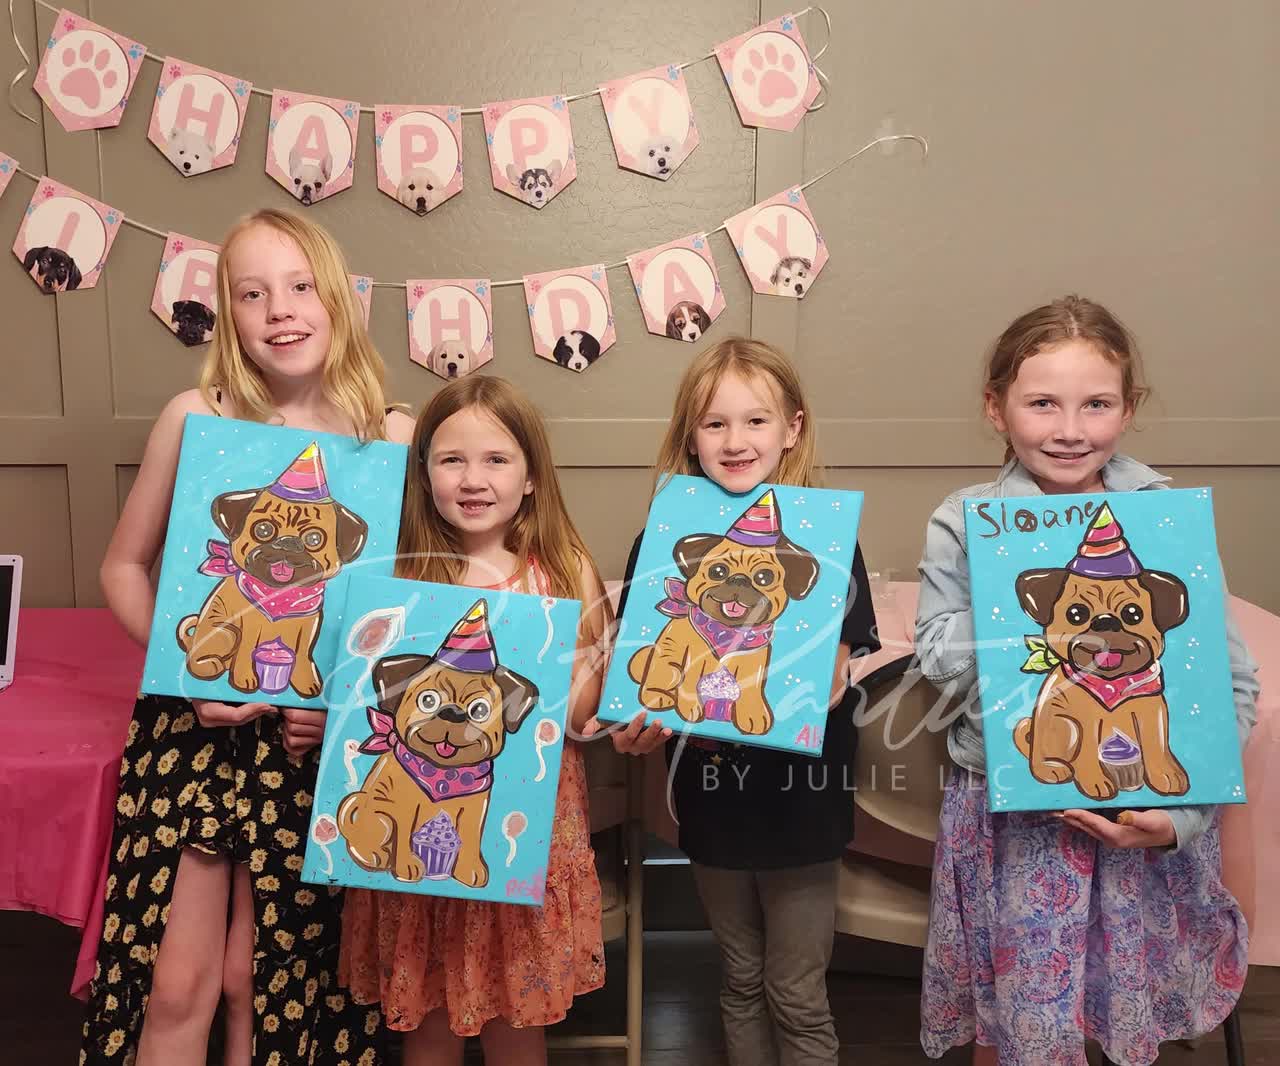 Kids FUN Art Paint Party Includes Preoutlined Canvas of Party Pug